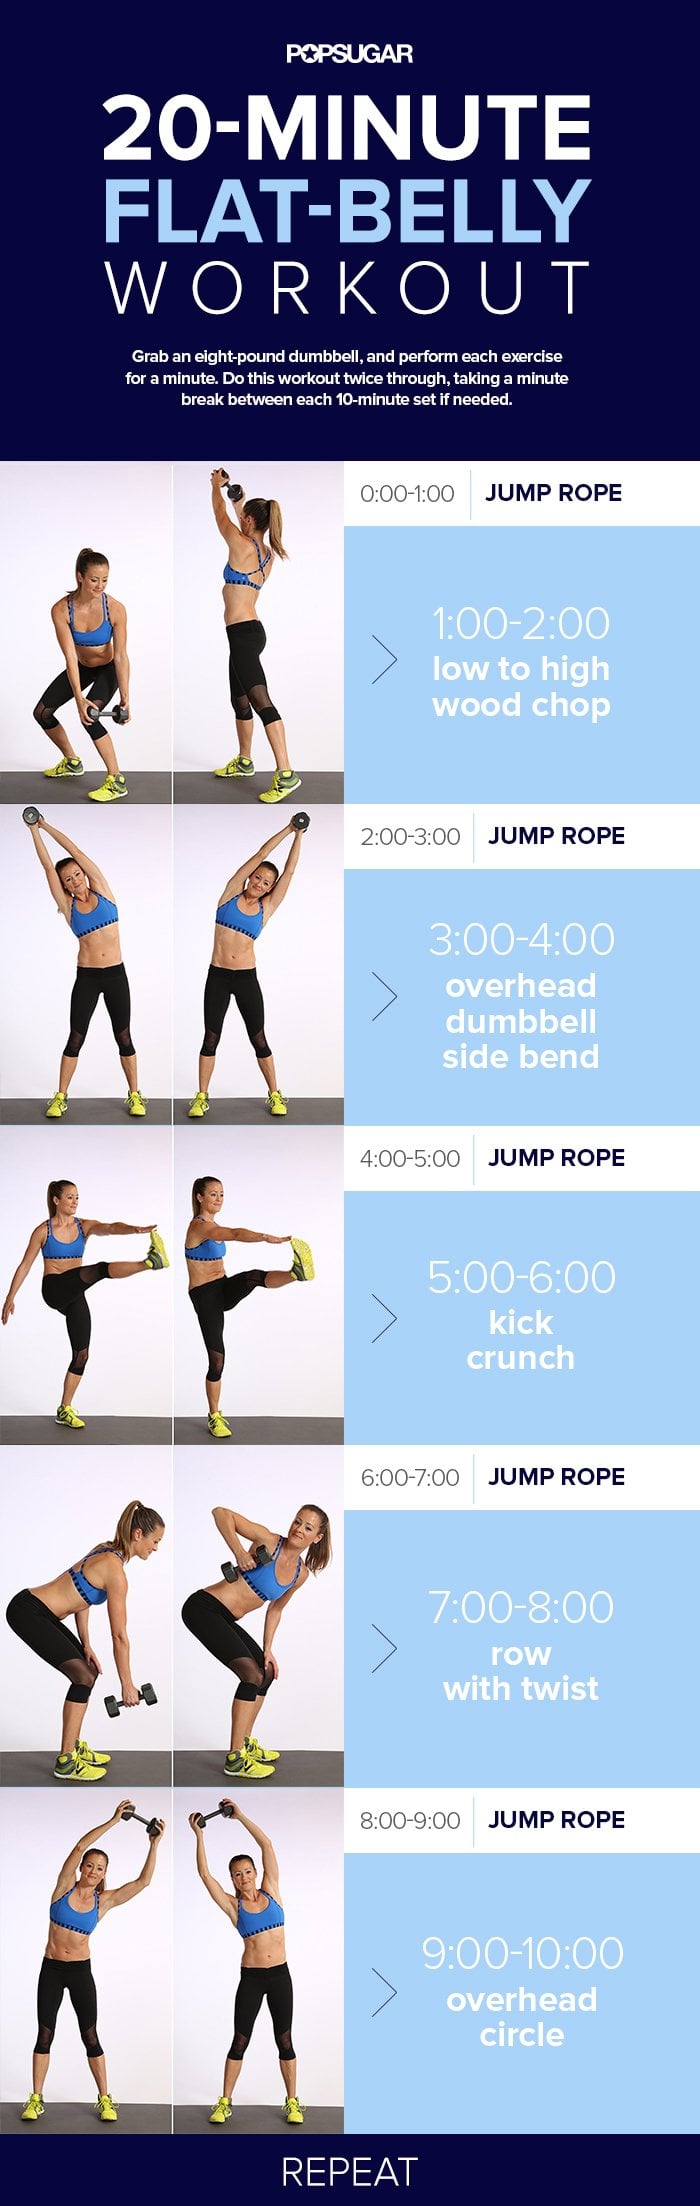 Day 6: 20-Minute Flat-Belly Workout